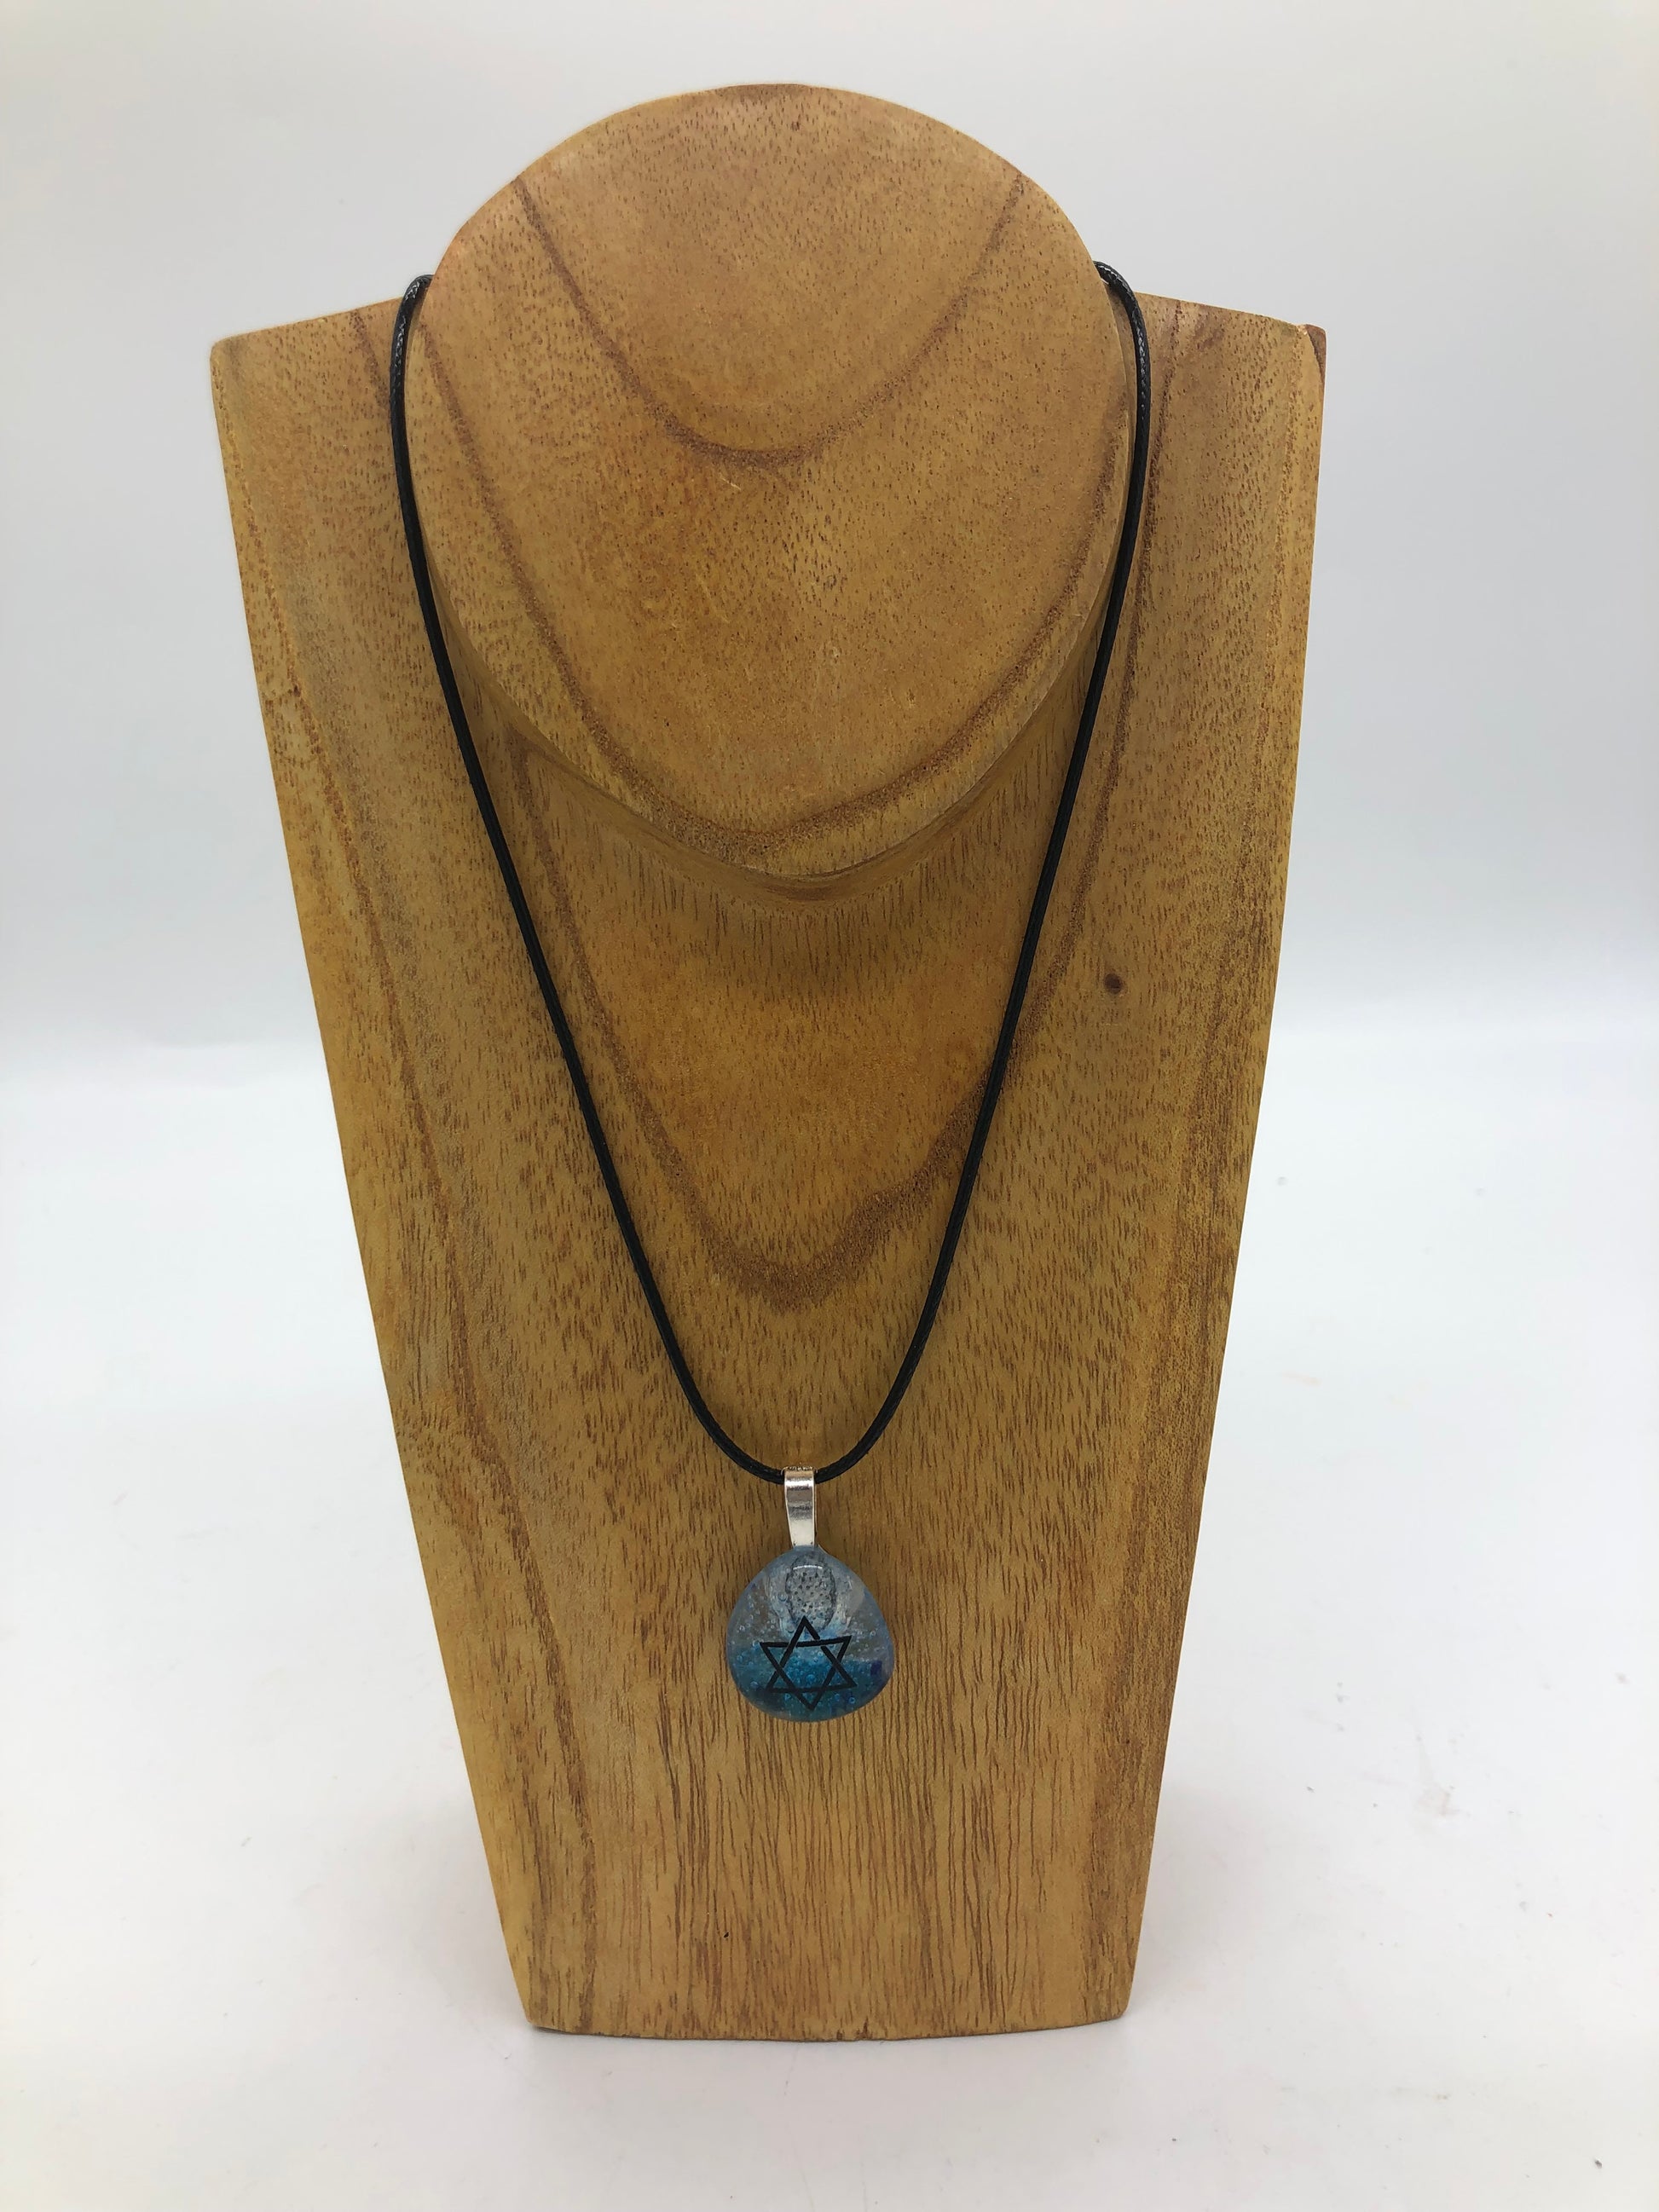 Fused glass necklace on a black cord, displayed on wooden holder.  Necklace design is a clear and blue circle with black star of David. 